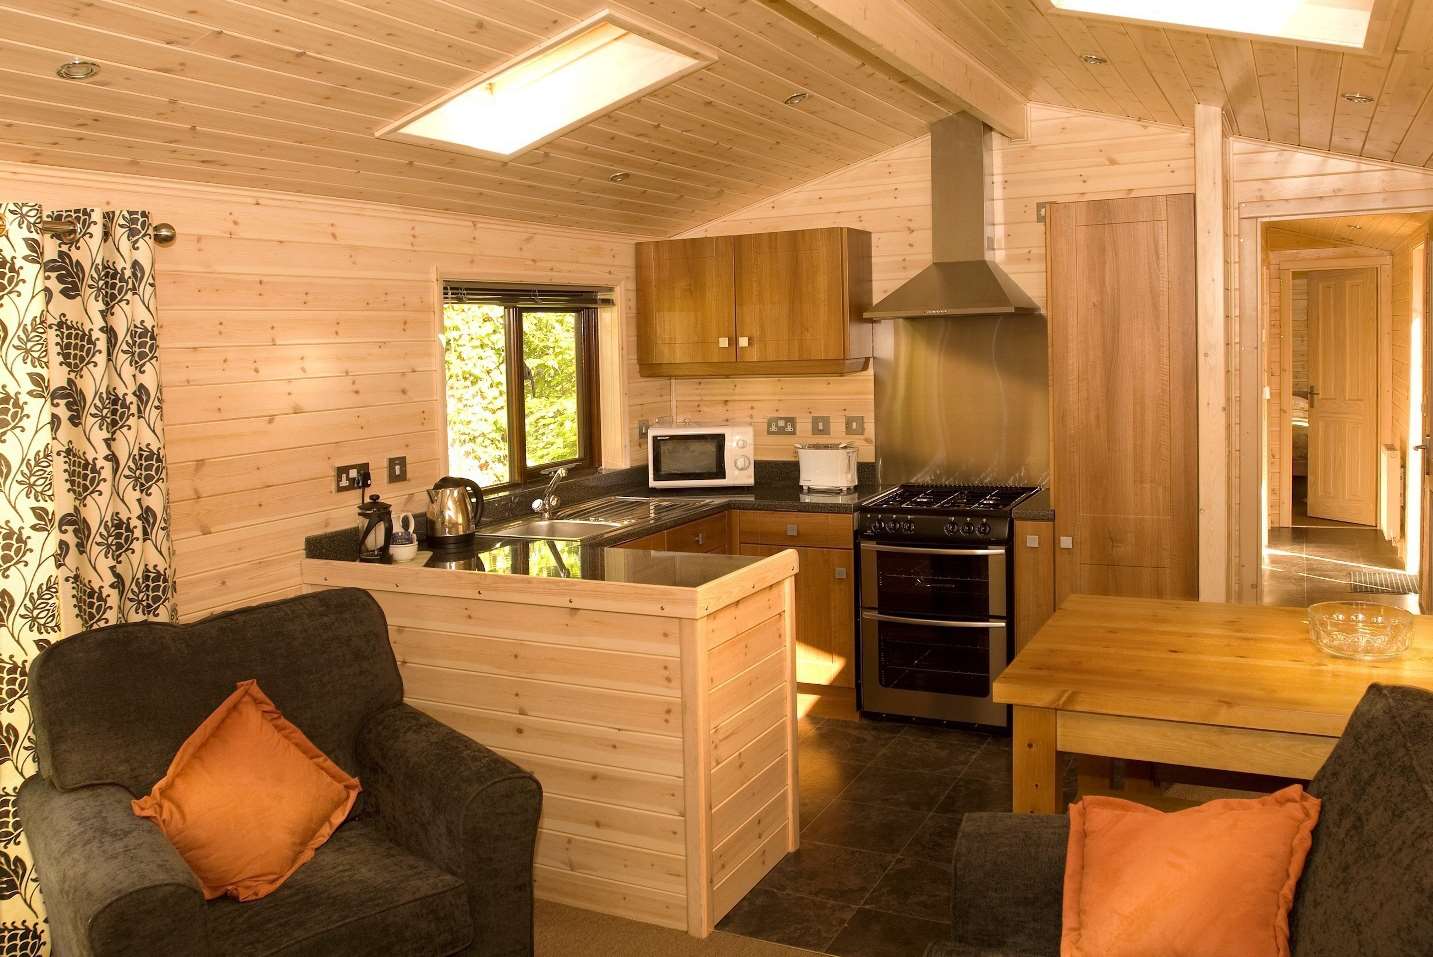 Inside one of wooden lodges at Sandy Balls Holiday Park.